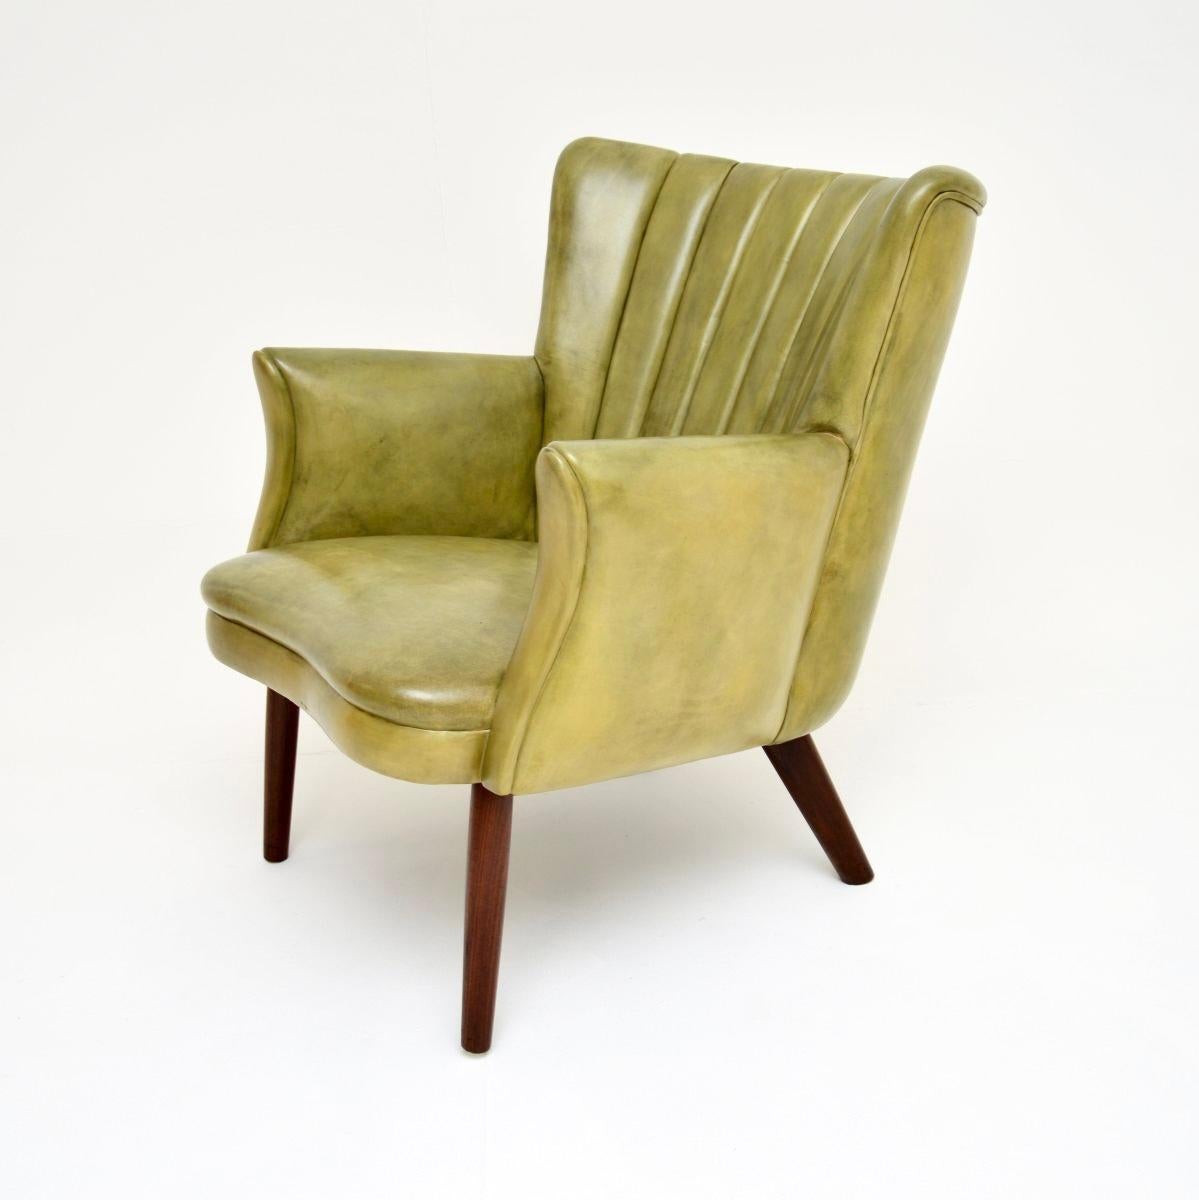 Mid-20th Century Danish Vintage Leather Armchair by Skipper For Sale